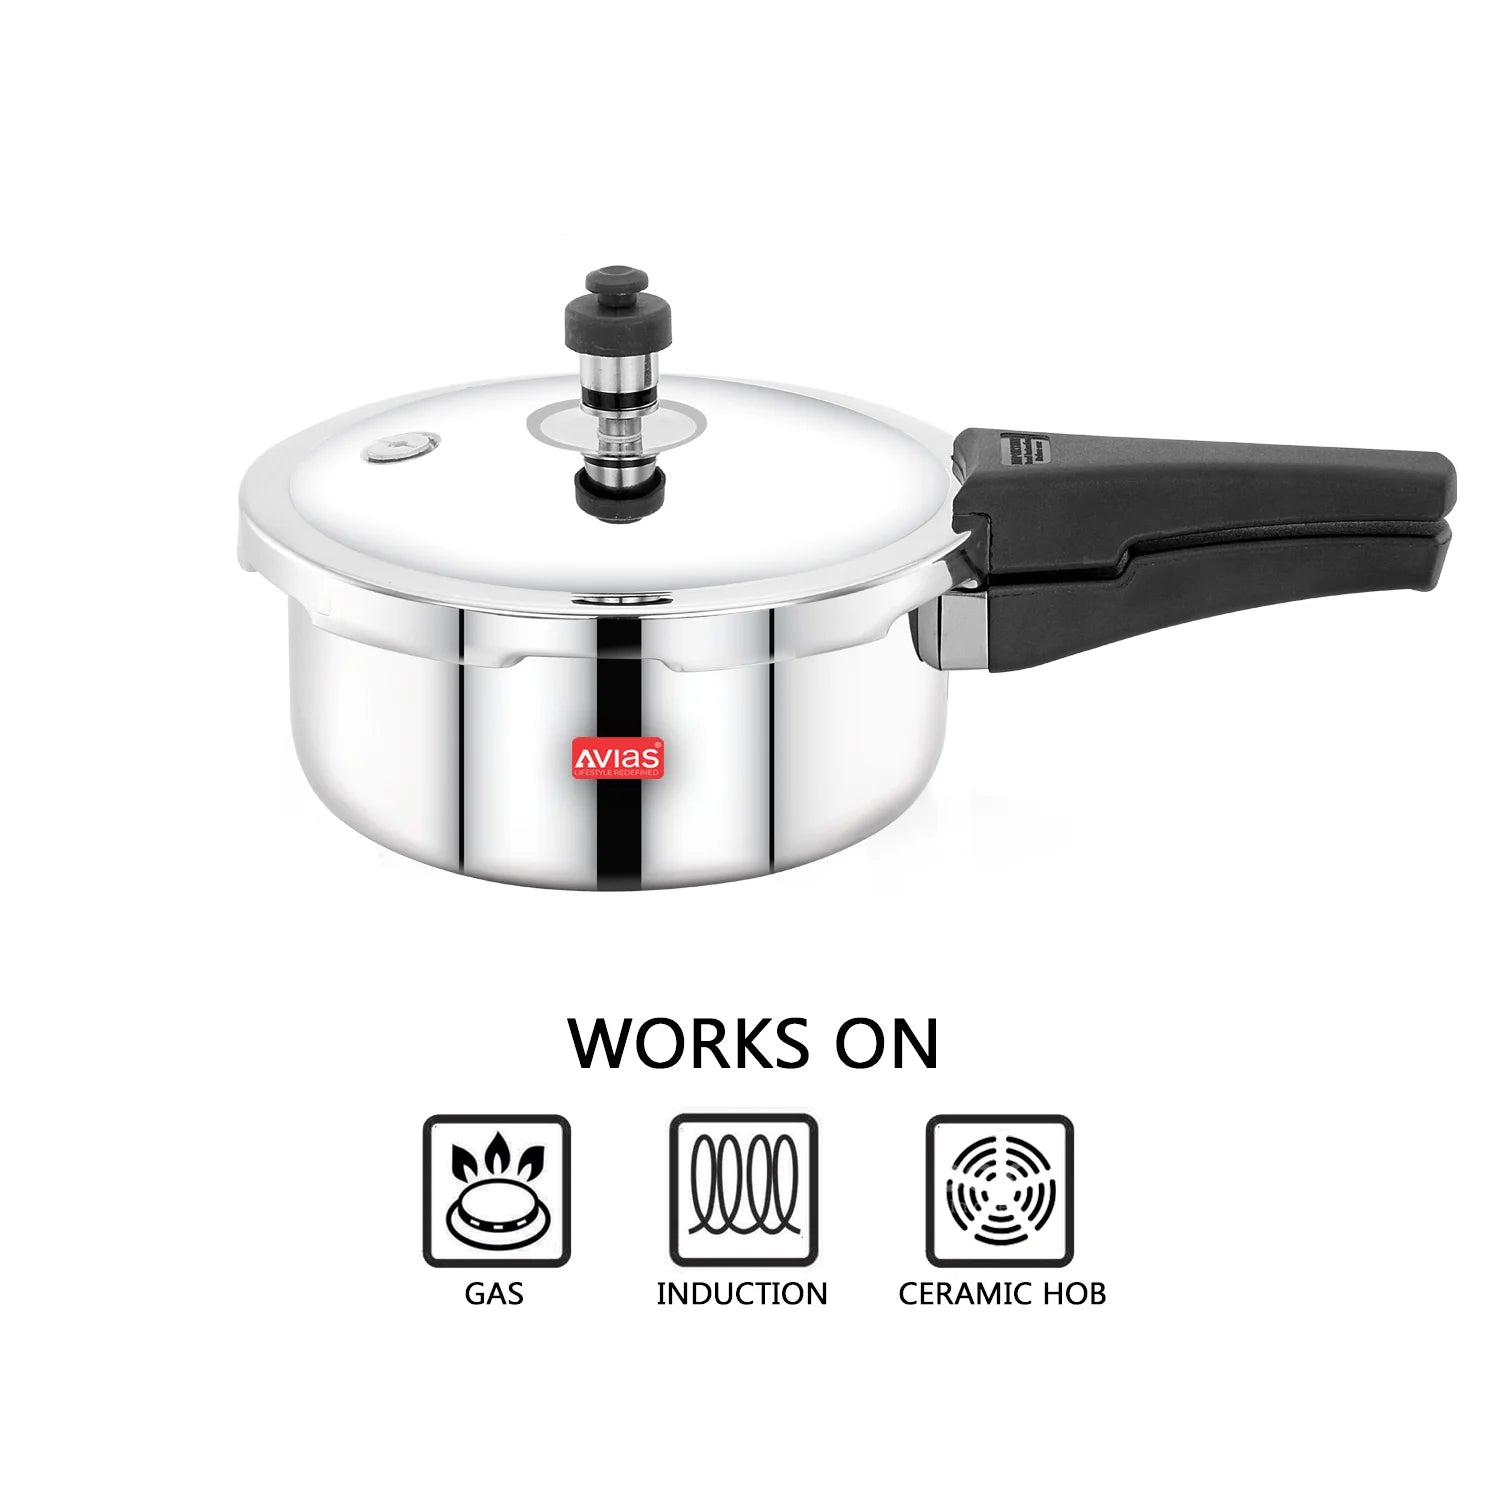 AVIAS Riara Premium Stainless Steel Triply Pressure Cooker with outer lid compatibility